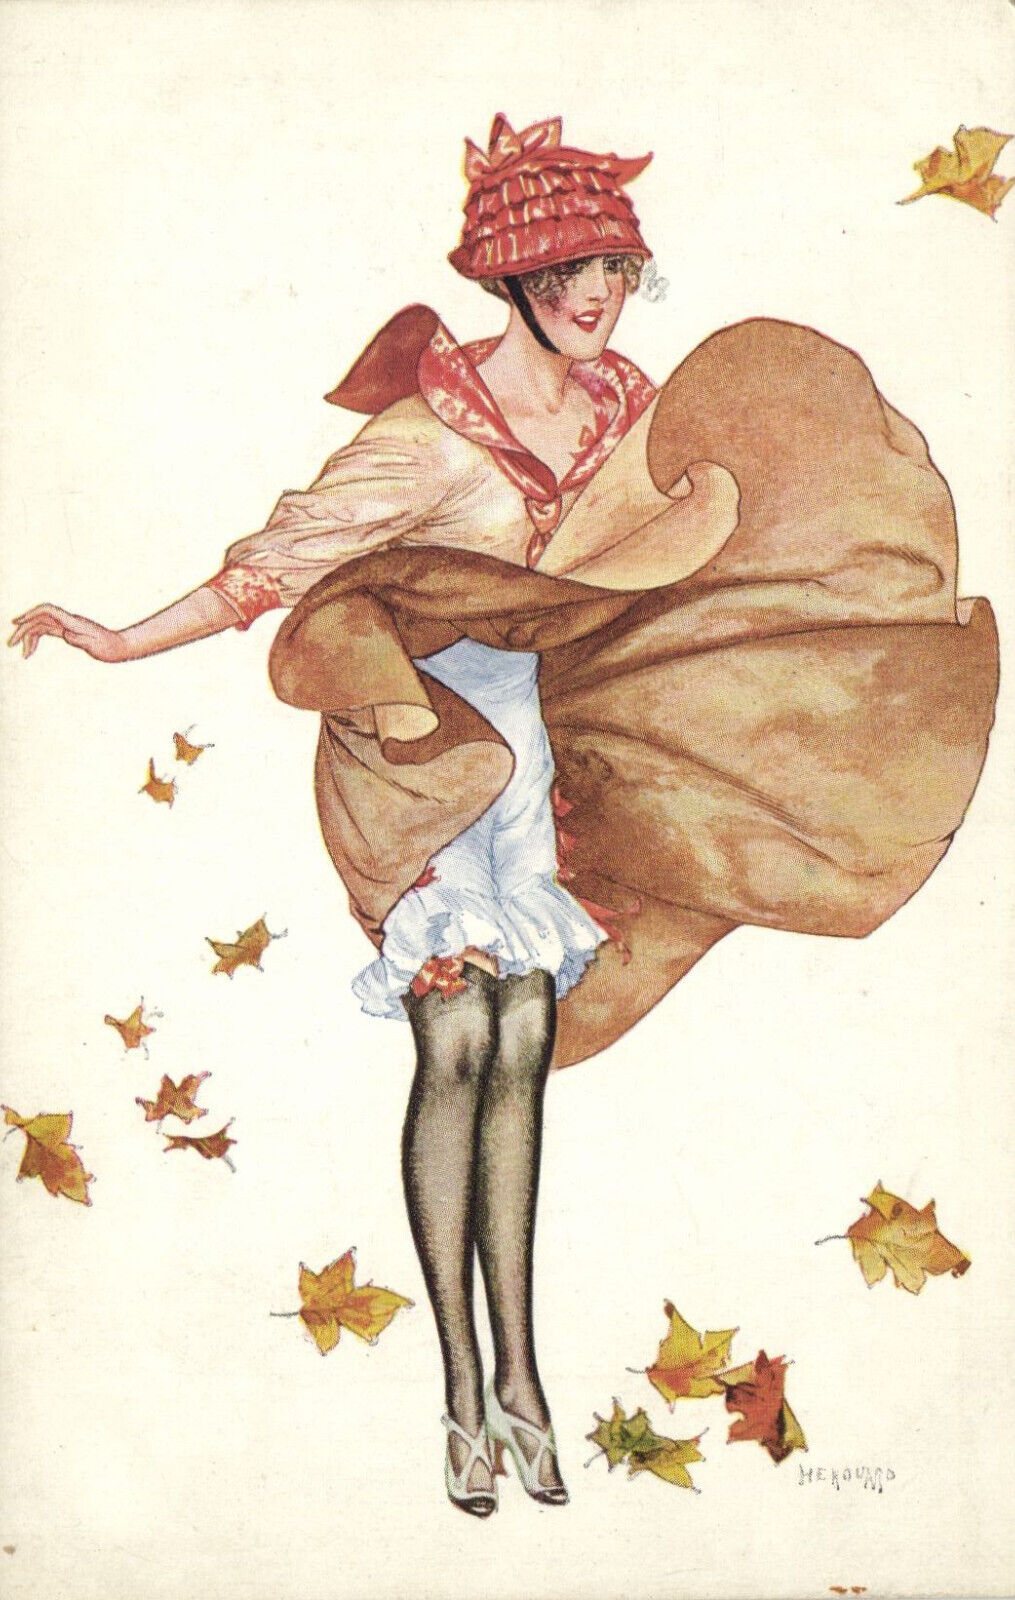 PC ARTIST SIGNED, HEROUARD, GLAMOUR, BEFORE THE WIND, Vintage Postcard (b50251)